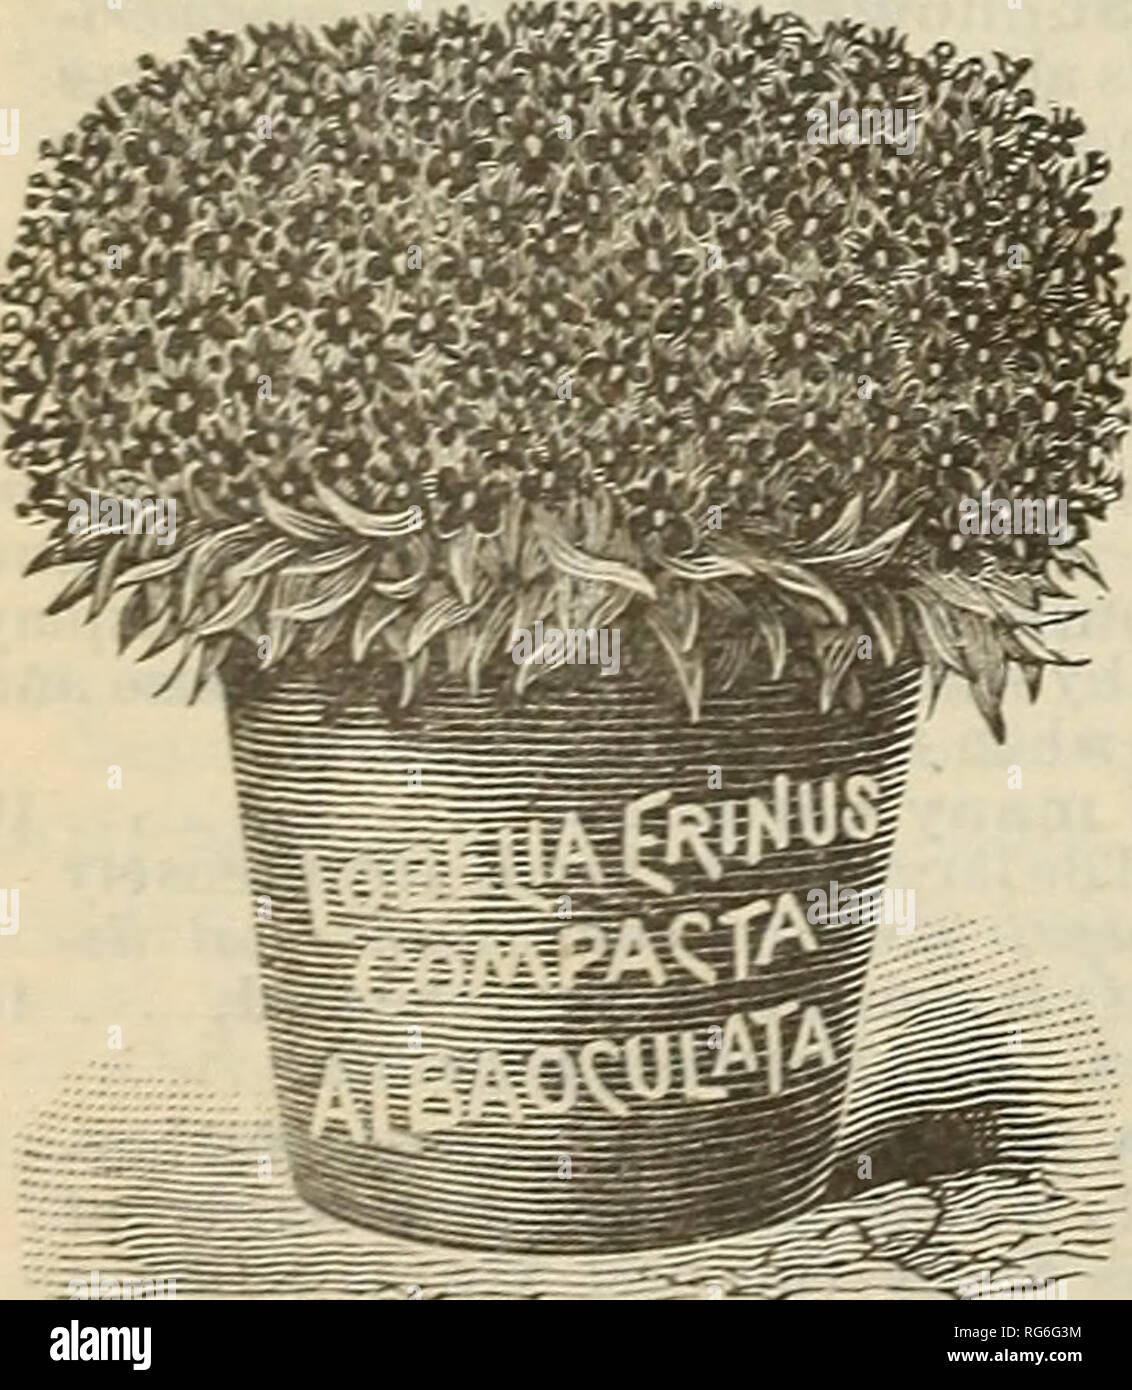 . Burpee's farm annual 1893. Nurseries (Horticulture) Pennsylvania Philadelphia Catalogs; Vegetables Seeds Catalogs; Plants, Ornamental Catalogs; Flowers Seeds Catalogs. THE DIAMOND FLOWER. IONOPSIDIUM (Diamond Floicer). A lovely little animal from Portugal, quickly covering the ground with tufts t* beautiful, moss-like foliage, from which the bright blossoms glisten like diamonds. per pkt. Acaule. White and lilac mixed, 10 LALLEMANTIA Canescens. Small blue; for bees, 5 LARKSPUR. Well-known annuals of great beauty, and noted for richness of their colors. Double Dwarf Rocket. Finest mixed, 5 Ta Stock Photo